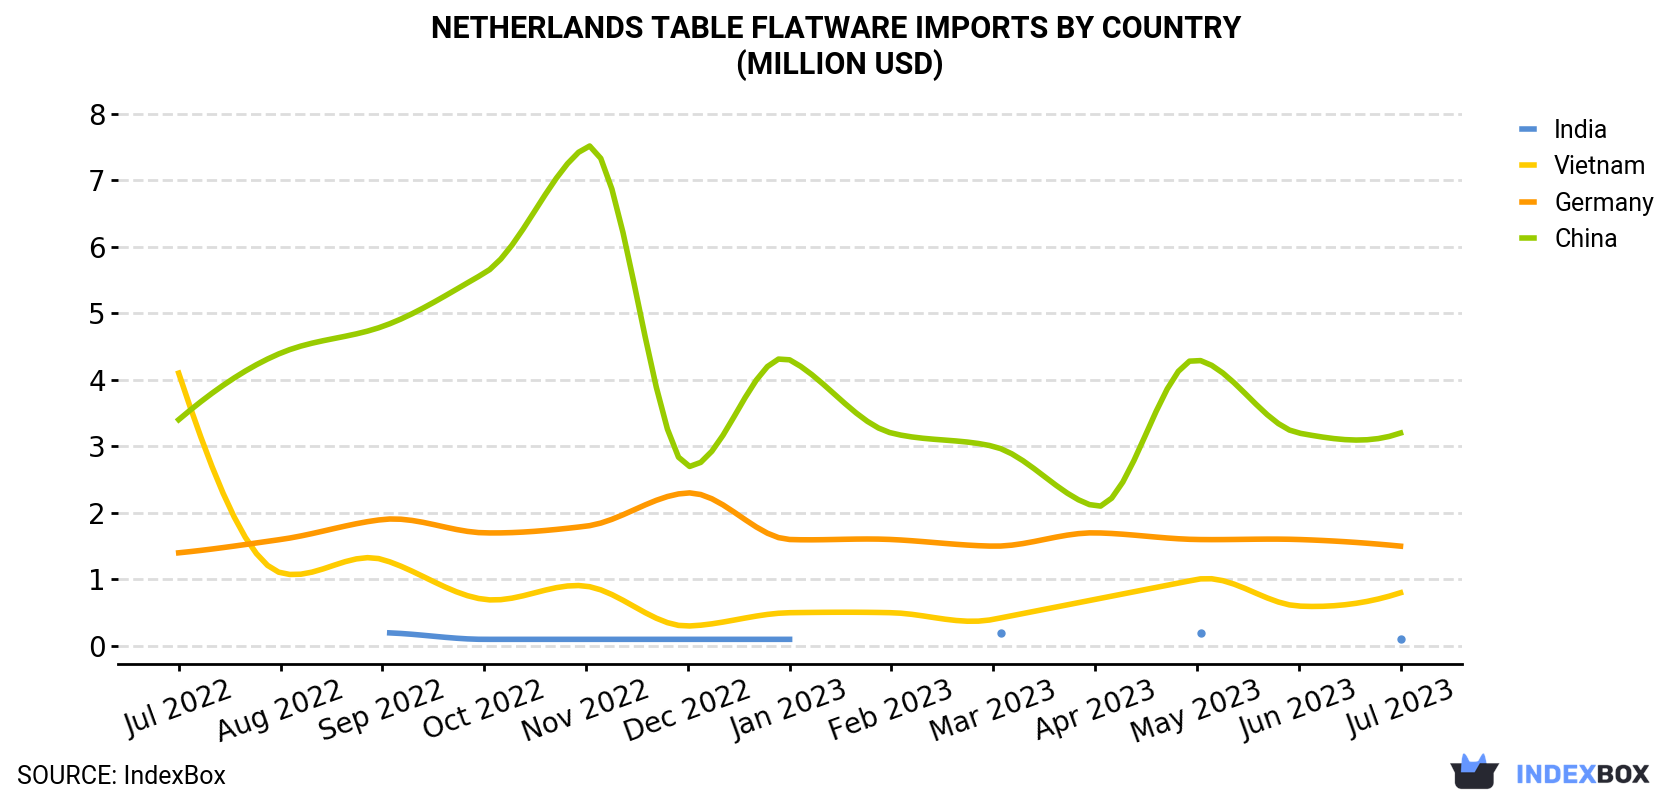 Netherlands Table Flatware Imports By Country (Million USD)